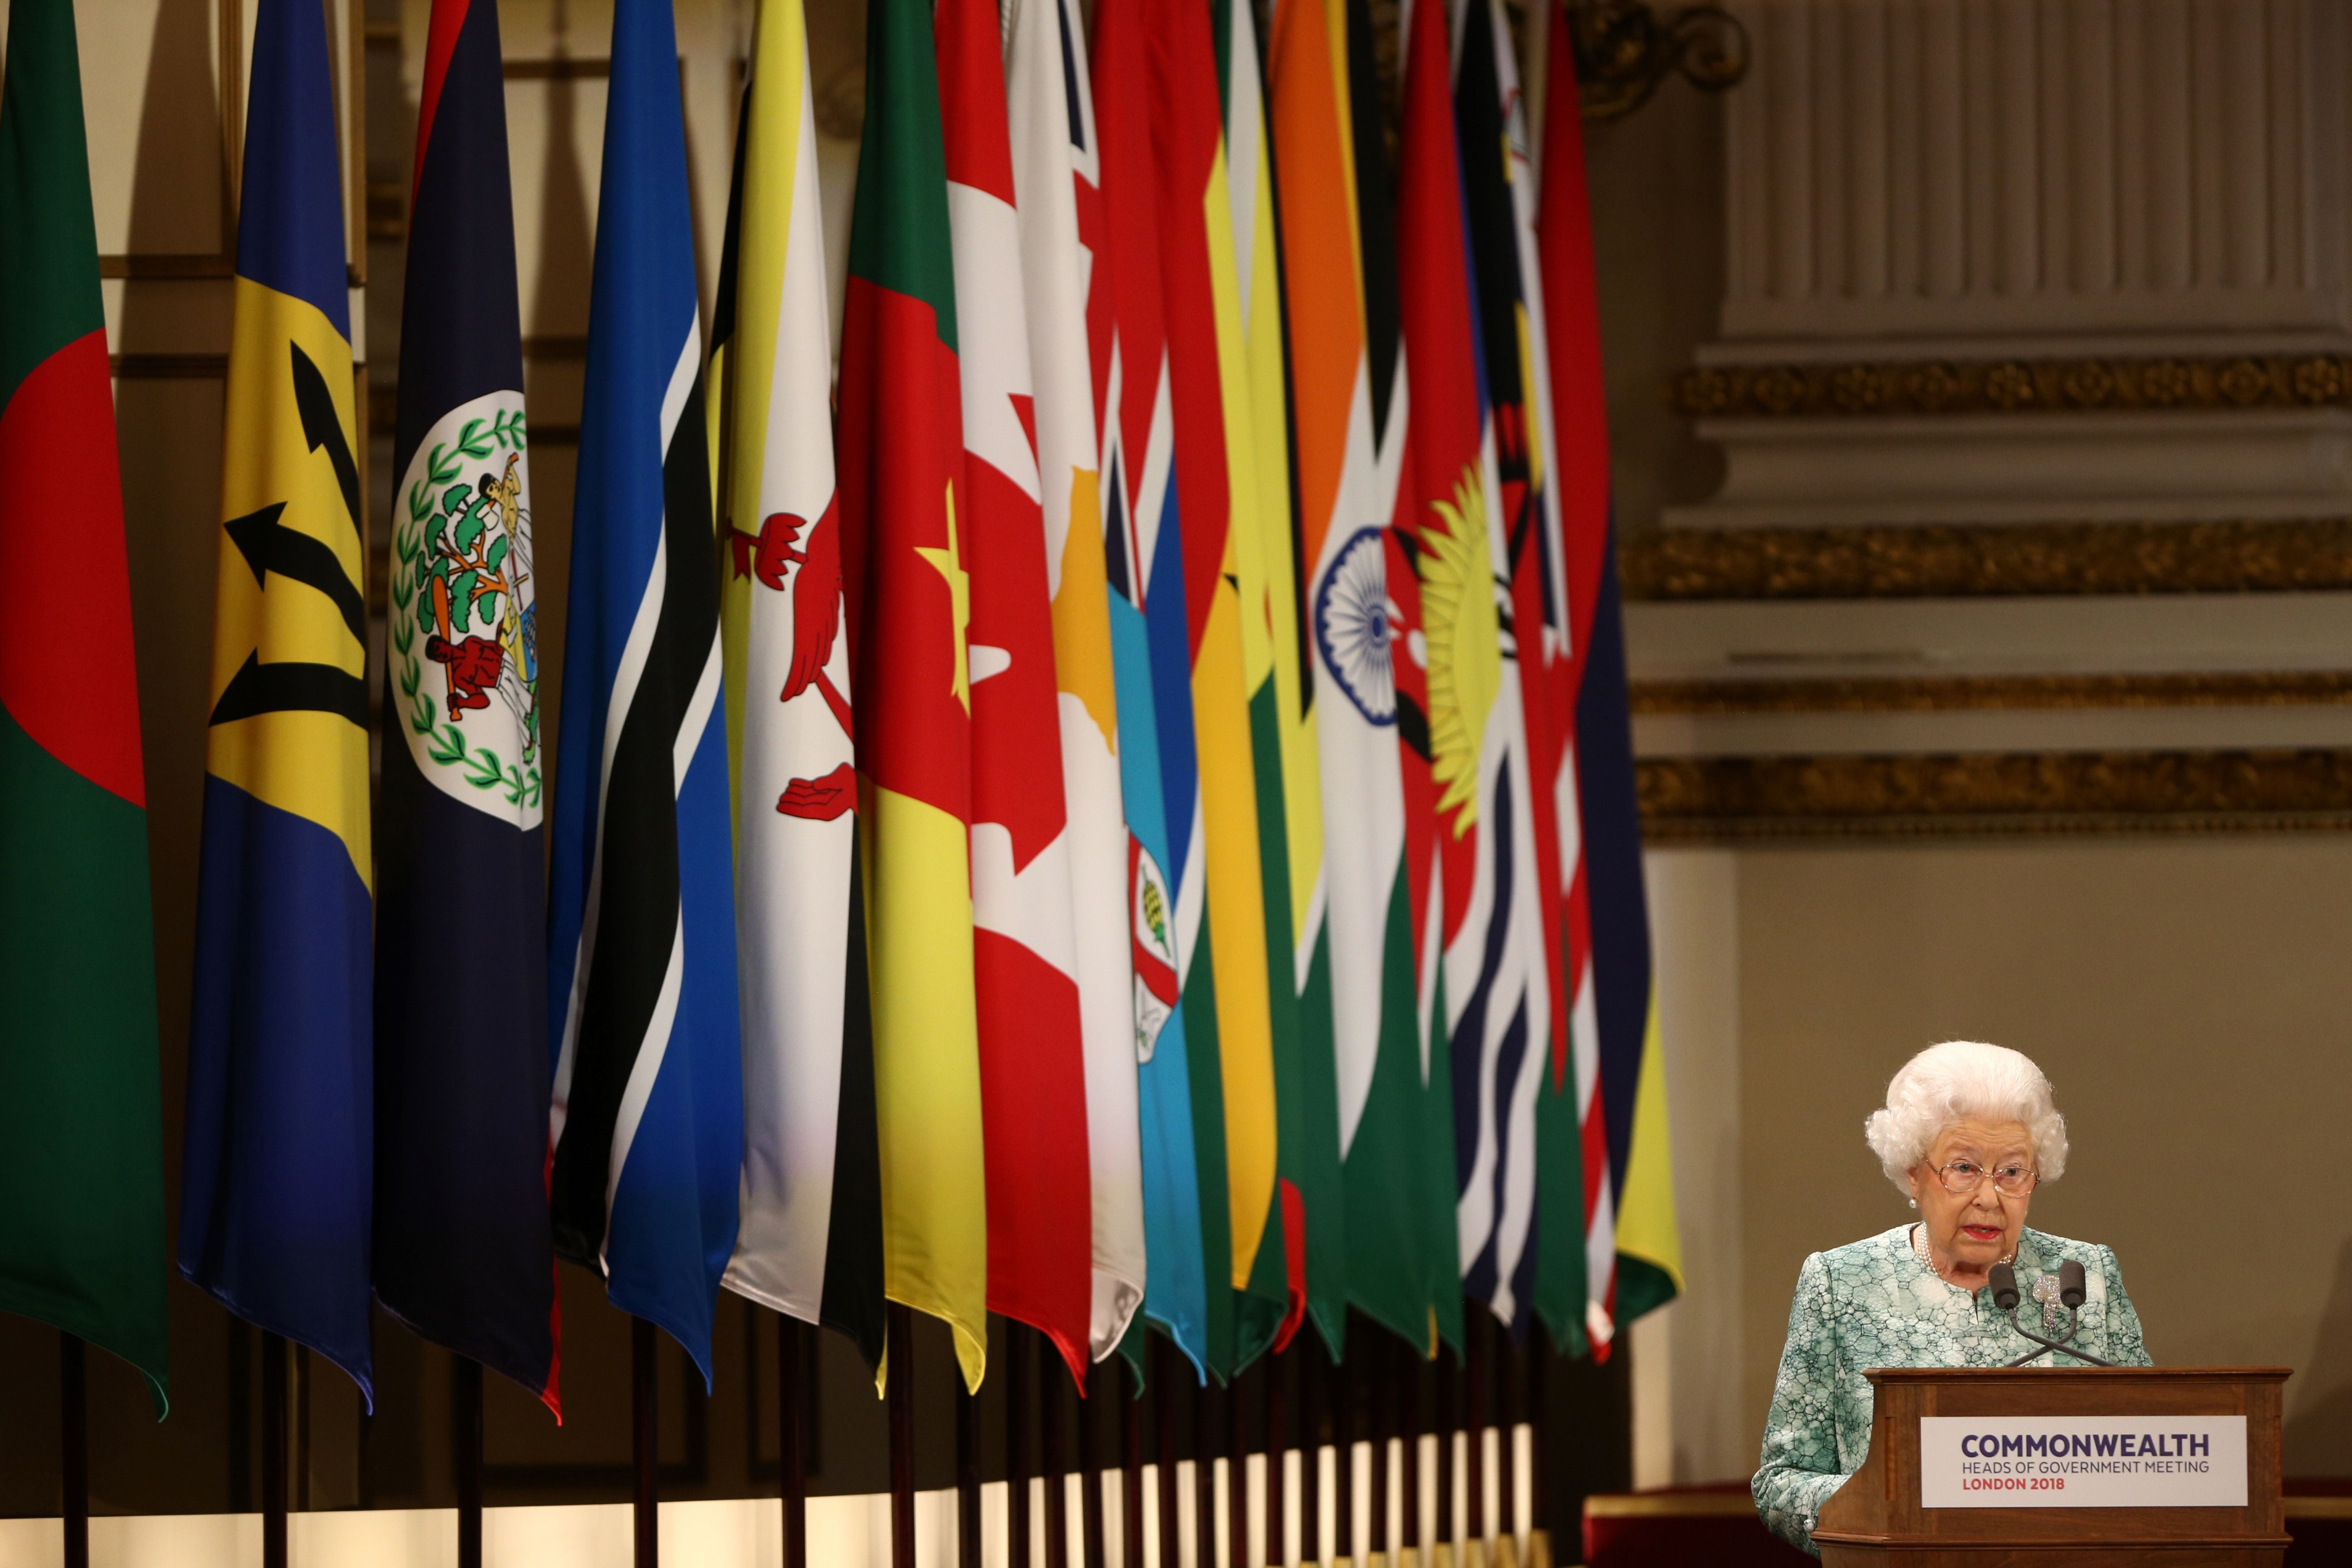 The Queen speaks at the formal opening of the Commonwealth Heads of Government Meeting in 2018